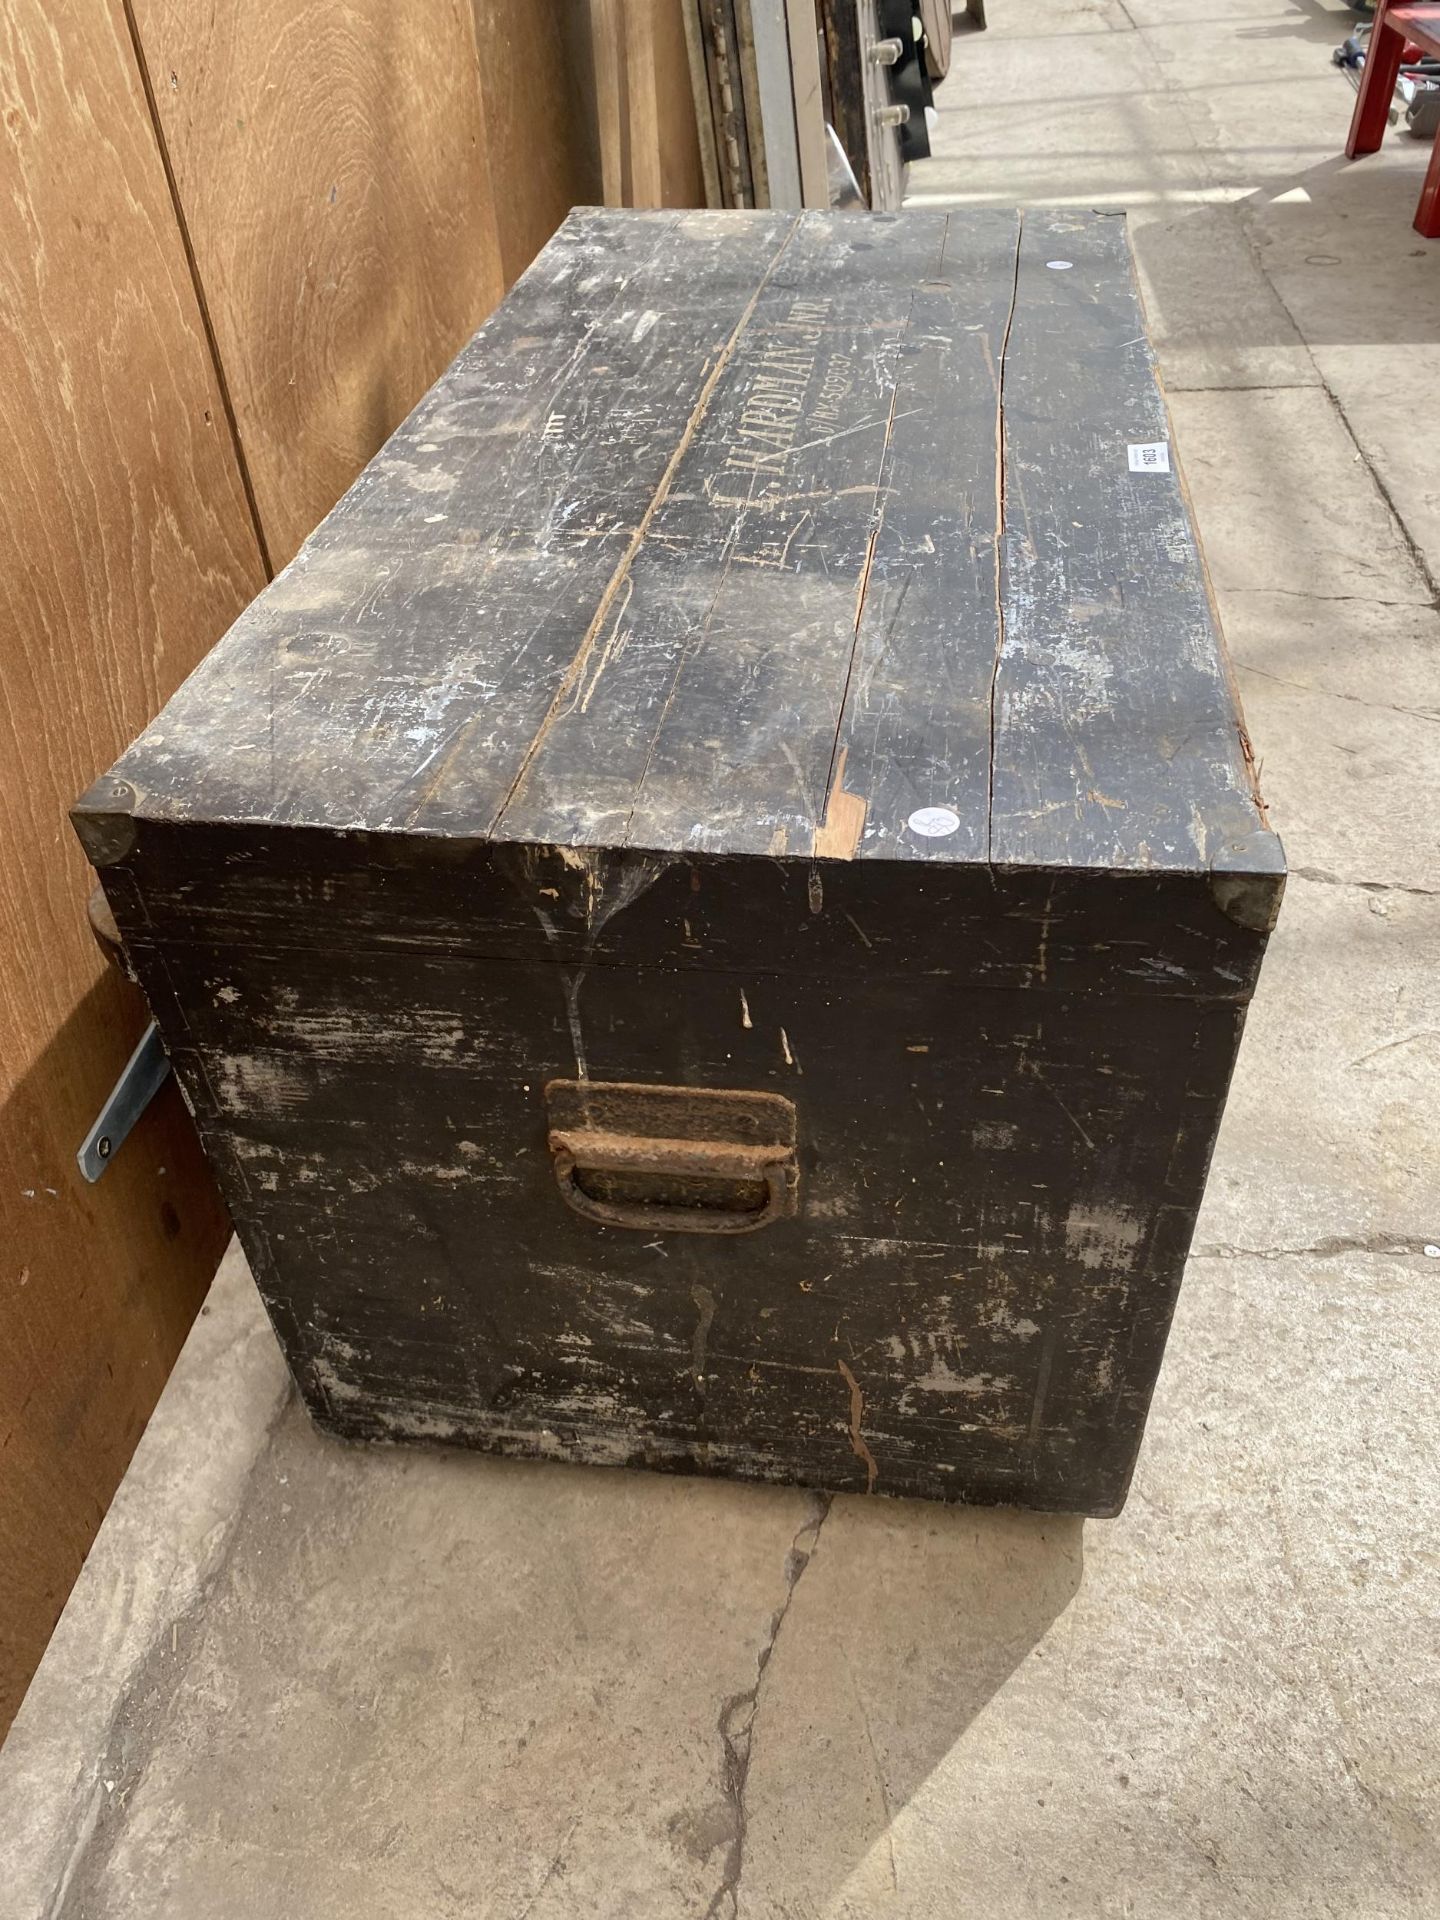 A VINTAGE WOODEN TOOL CHEST WITH TOP INSERTS AND STAMPED ' L.HARDMAN JNR' - Image 2 of 4